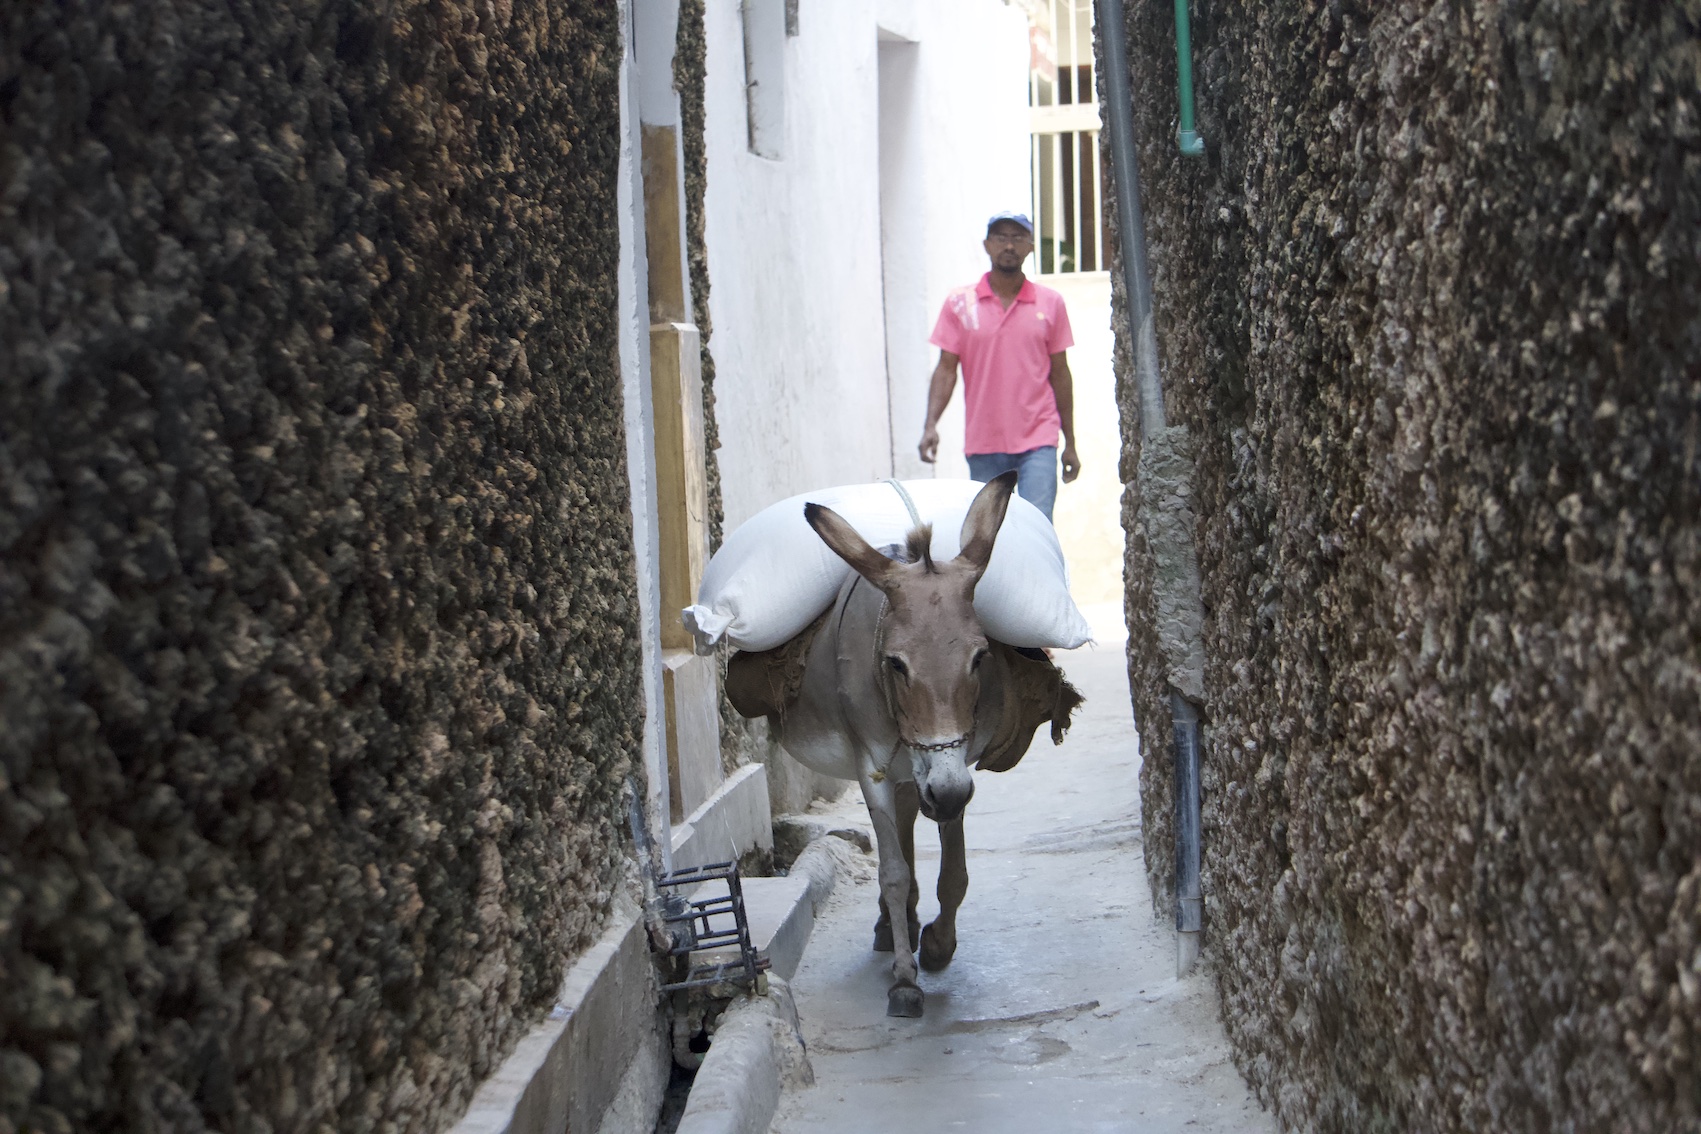 Donkey carrying two sacs and a man behind, on Lmu Old Town street